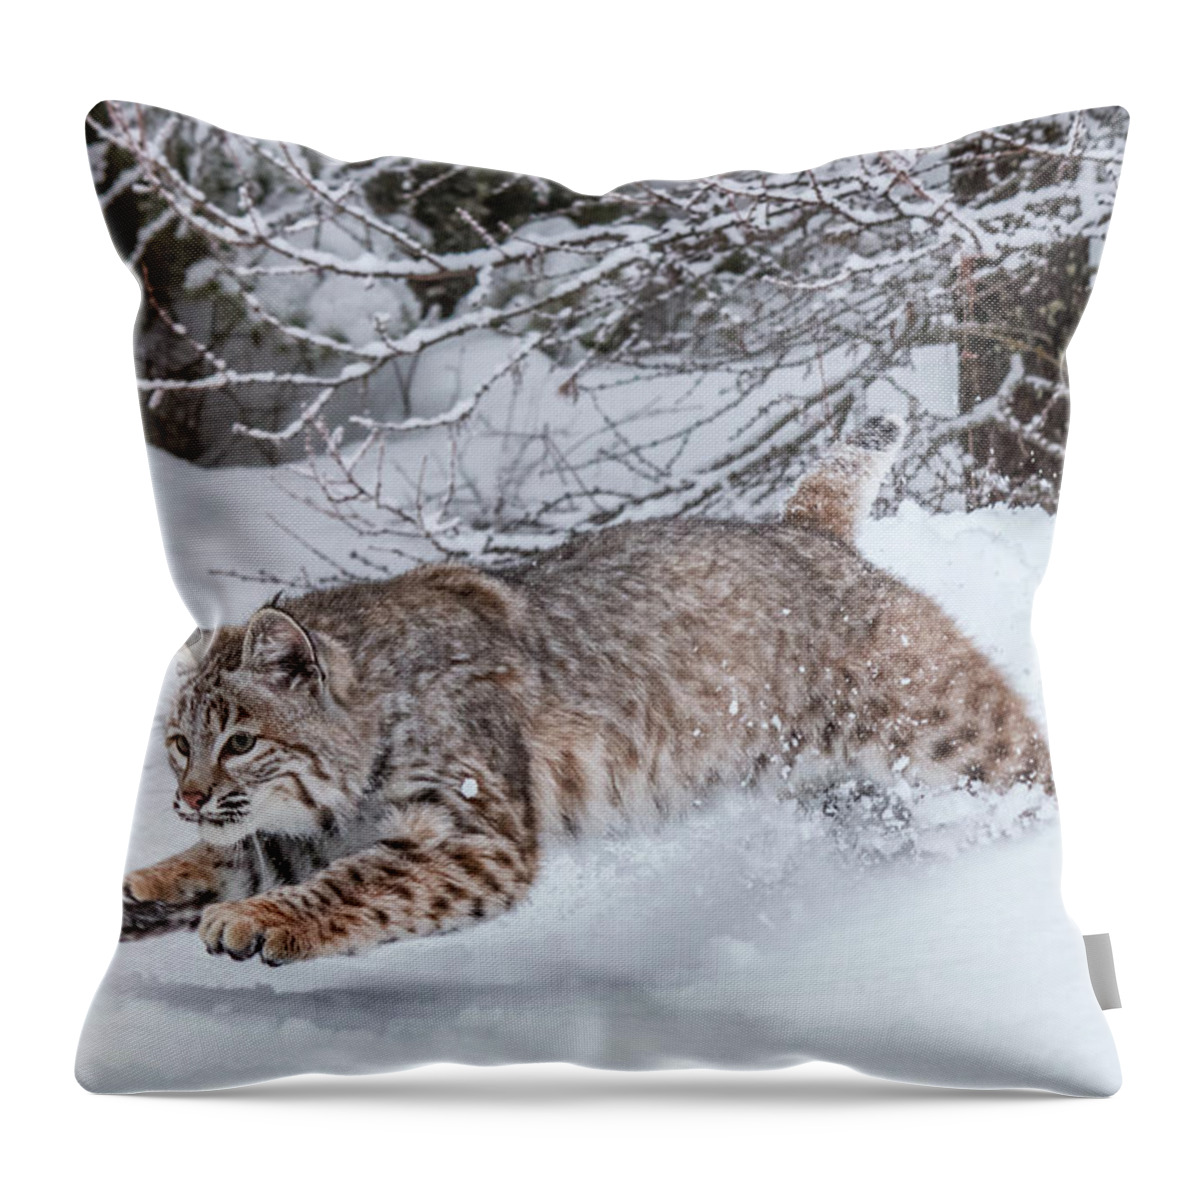 Animal Throw Pillow featuring the photograph Catching Some Air by Teresa Wilson